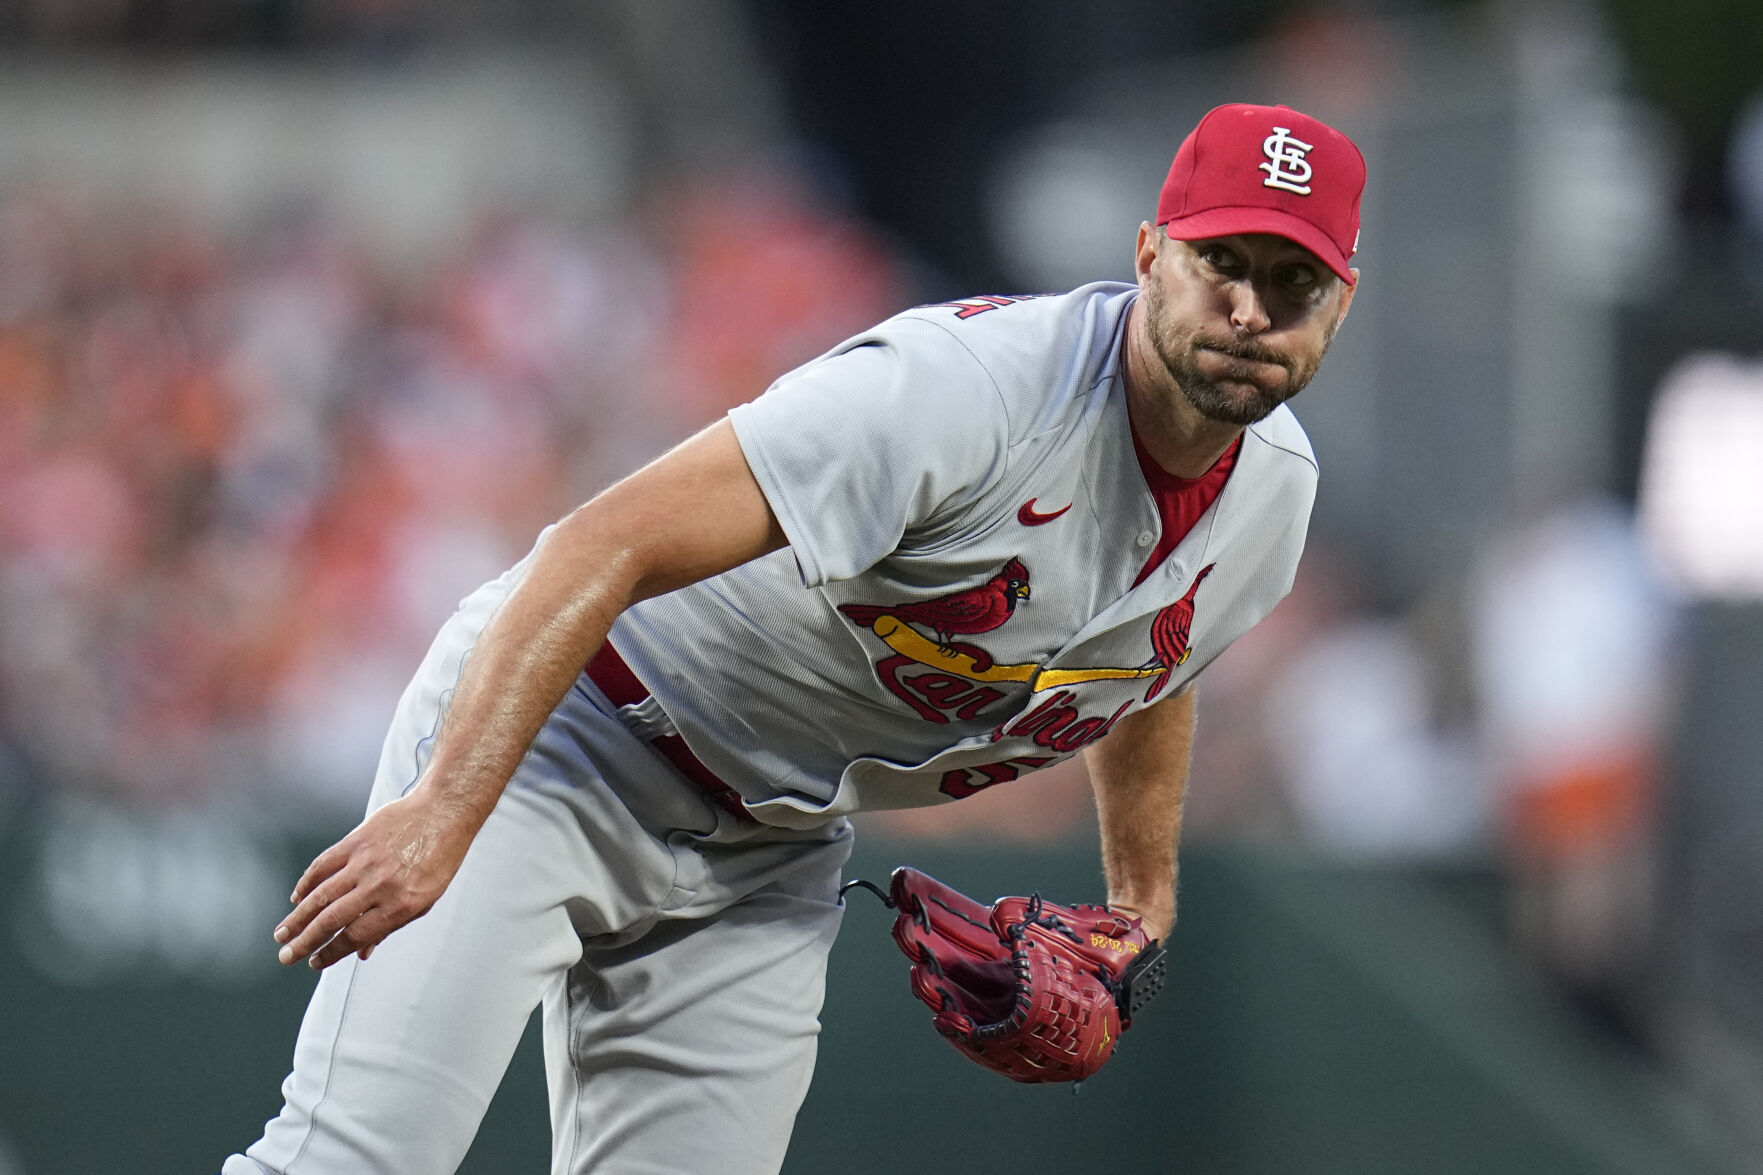 Cardinals Wainwright struggles, but now one win shy of 200